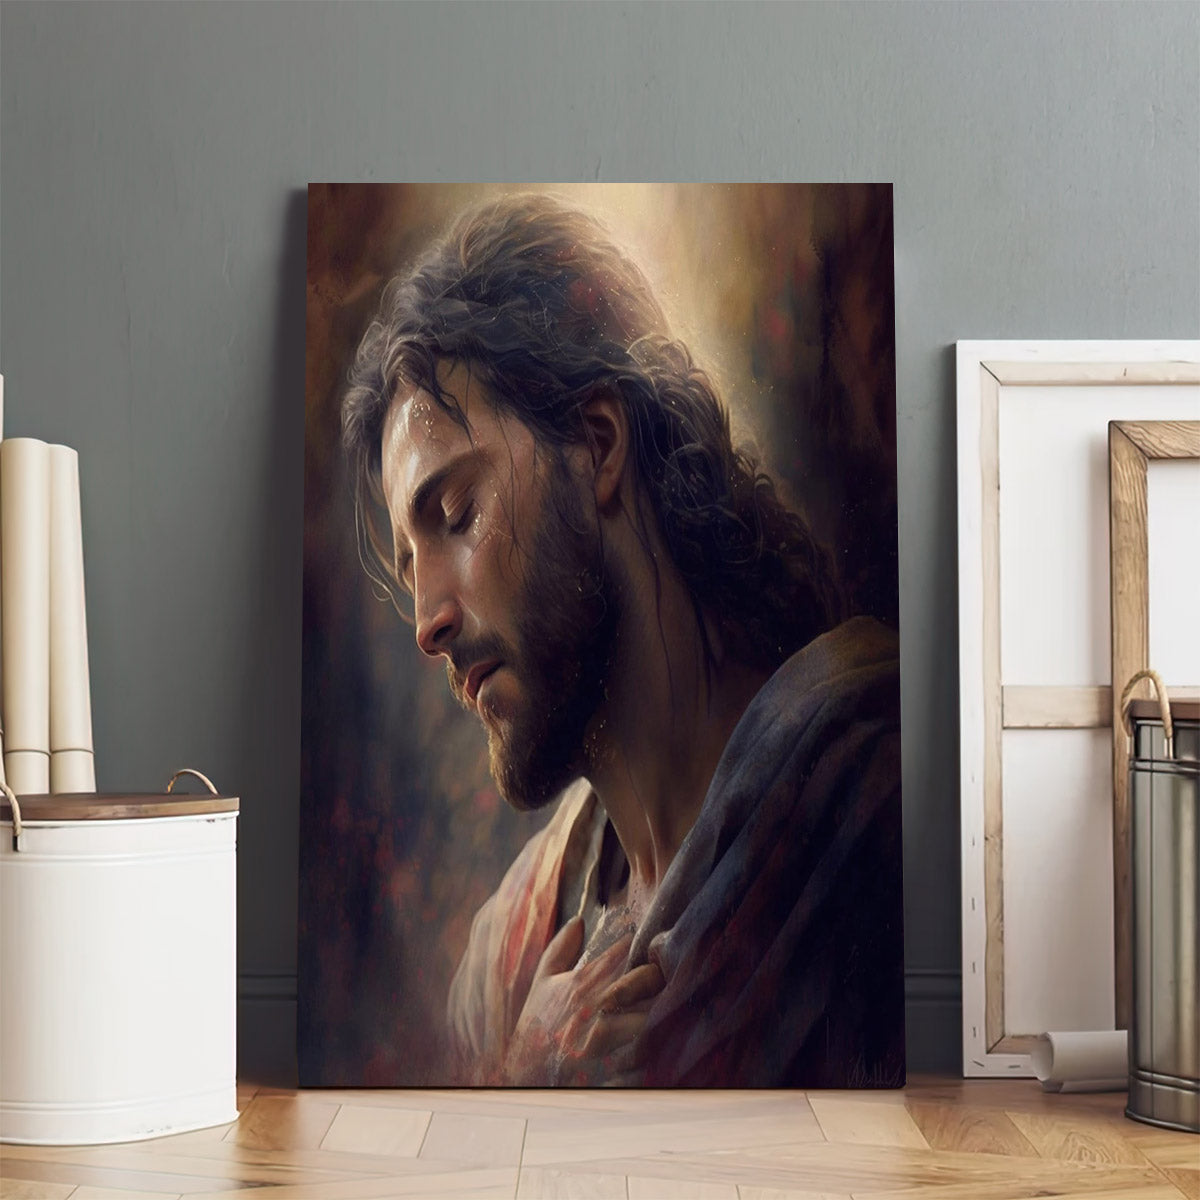 Jesus Son Of God - Canvas Pictures - Jesus Canvas Art - Christian Wall Art